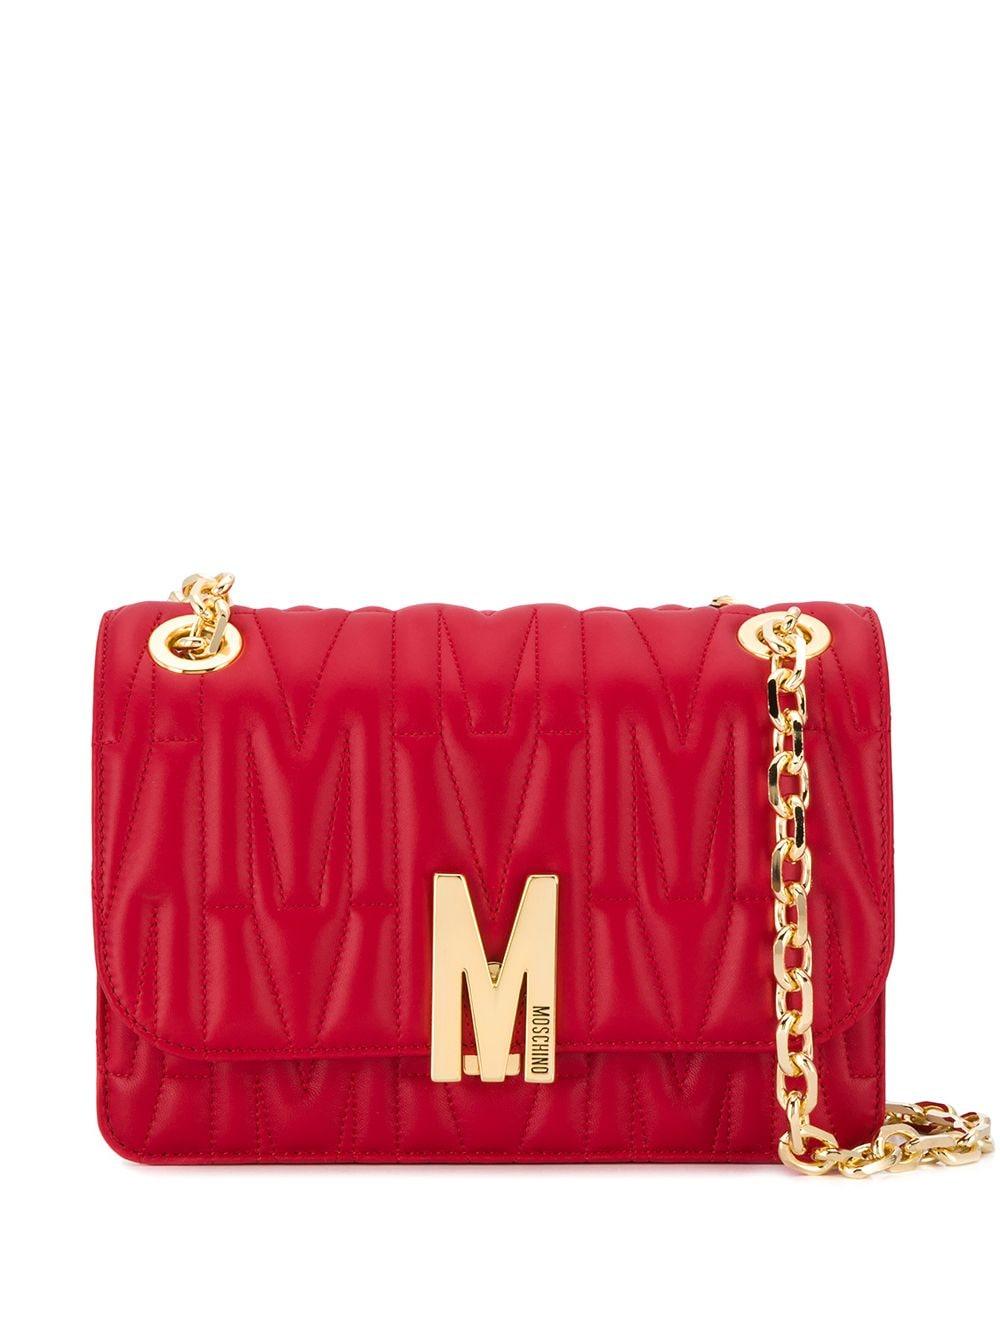 Moschino Leather Monogram-quilted Shoulder Bag in Red - Save 33% - Lyst